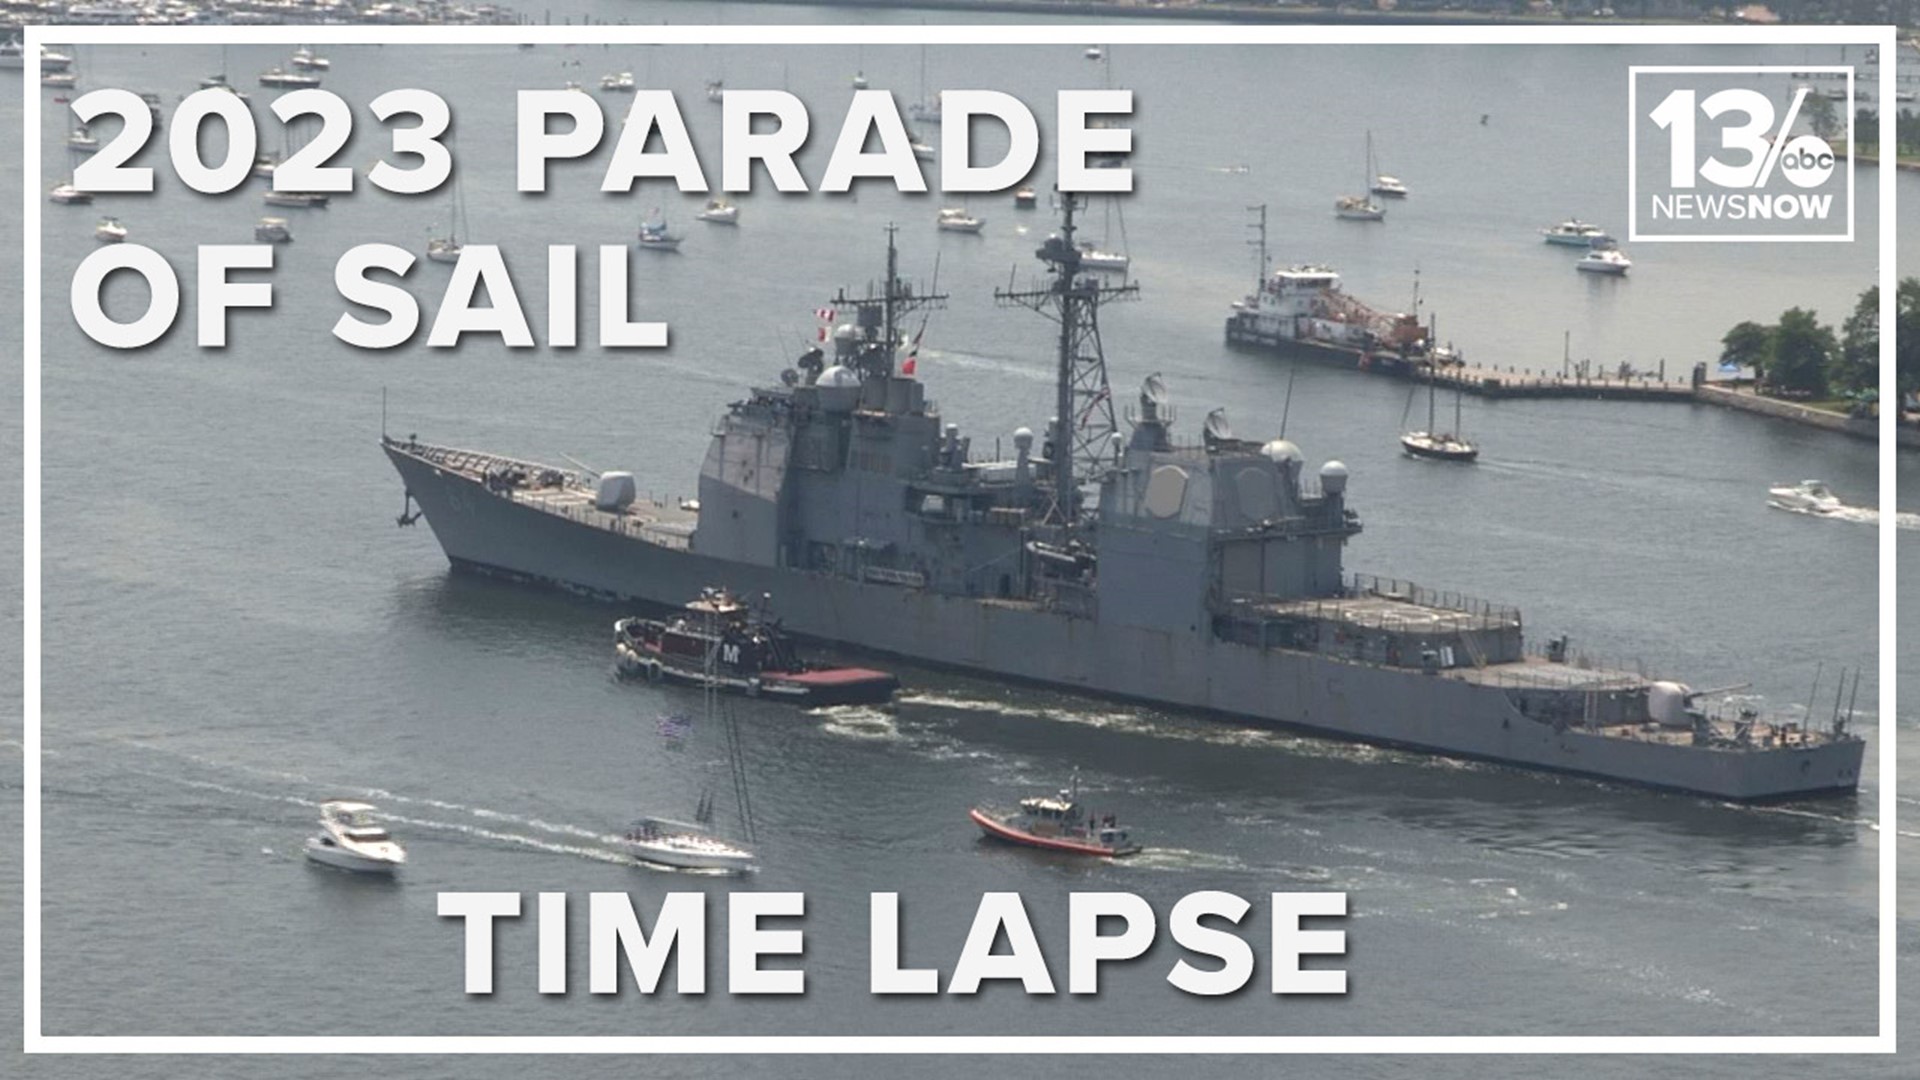 A speedy look at the ships participating in the 2023 Harborfest Parade of Sail! This time-lapse is sped up by 1222%.